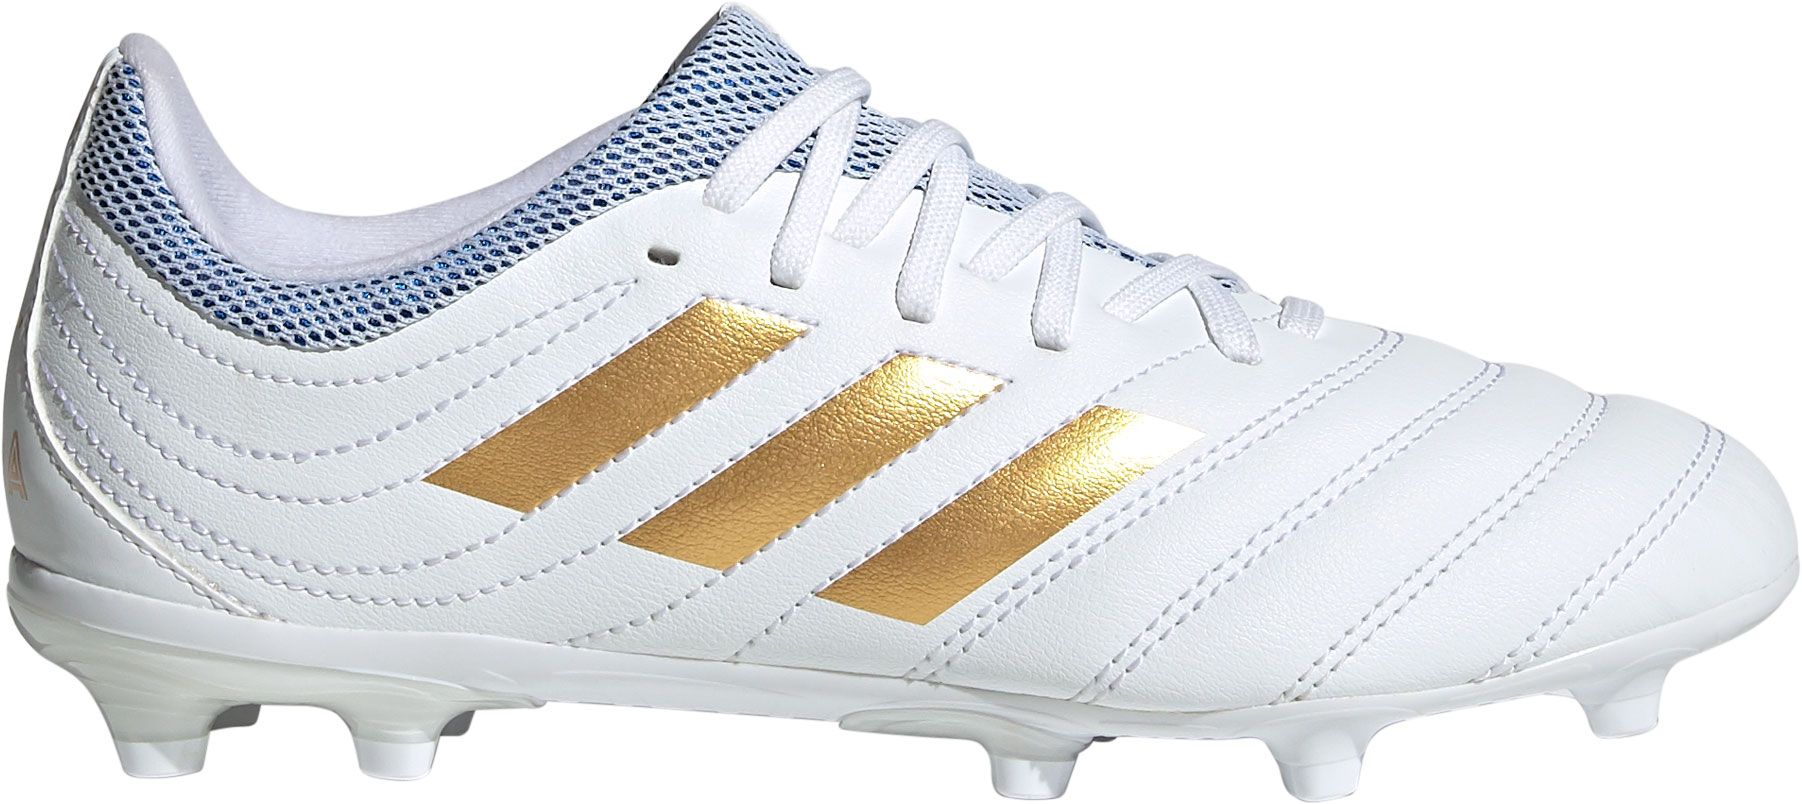 white adidas soccer cleats